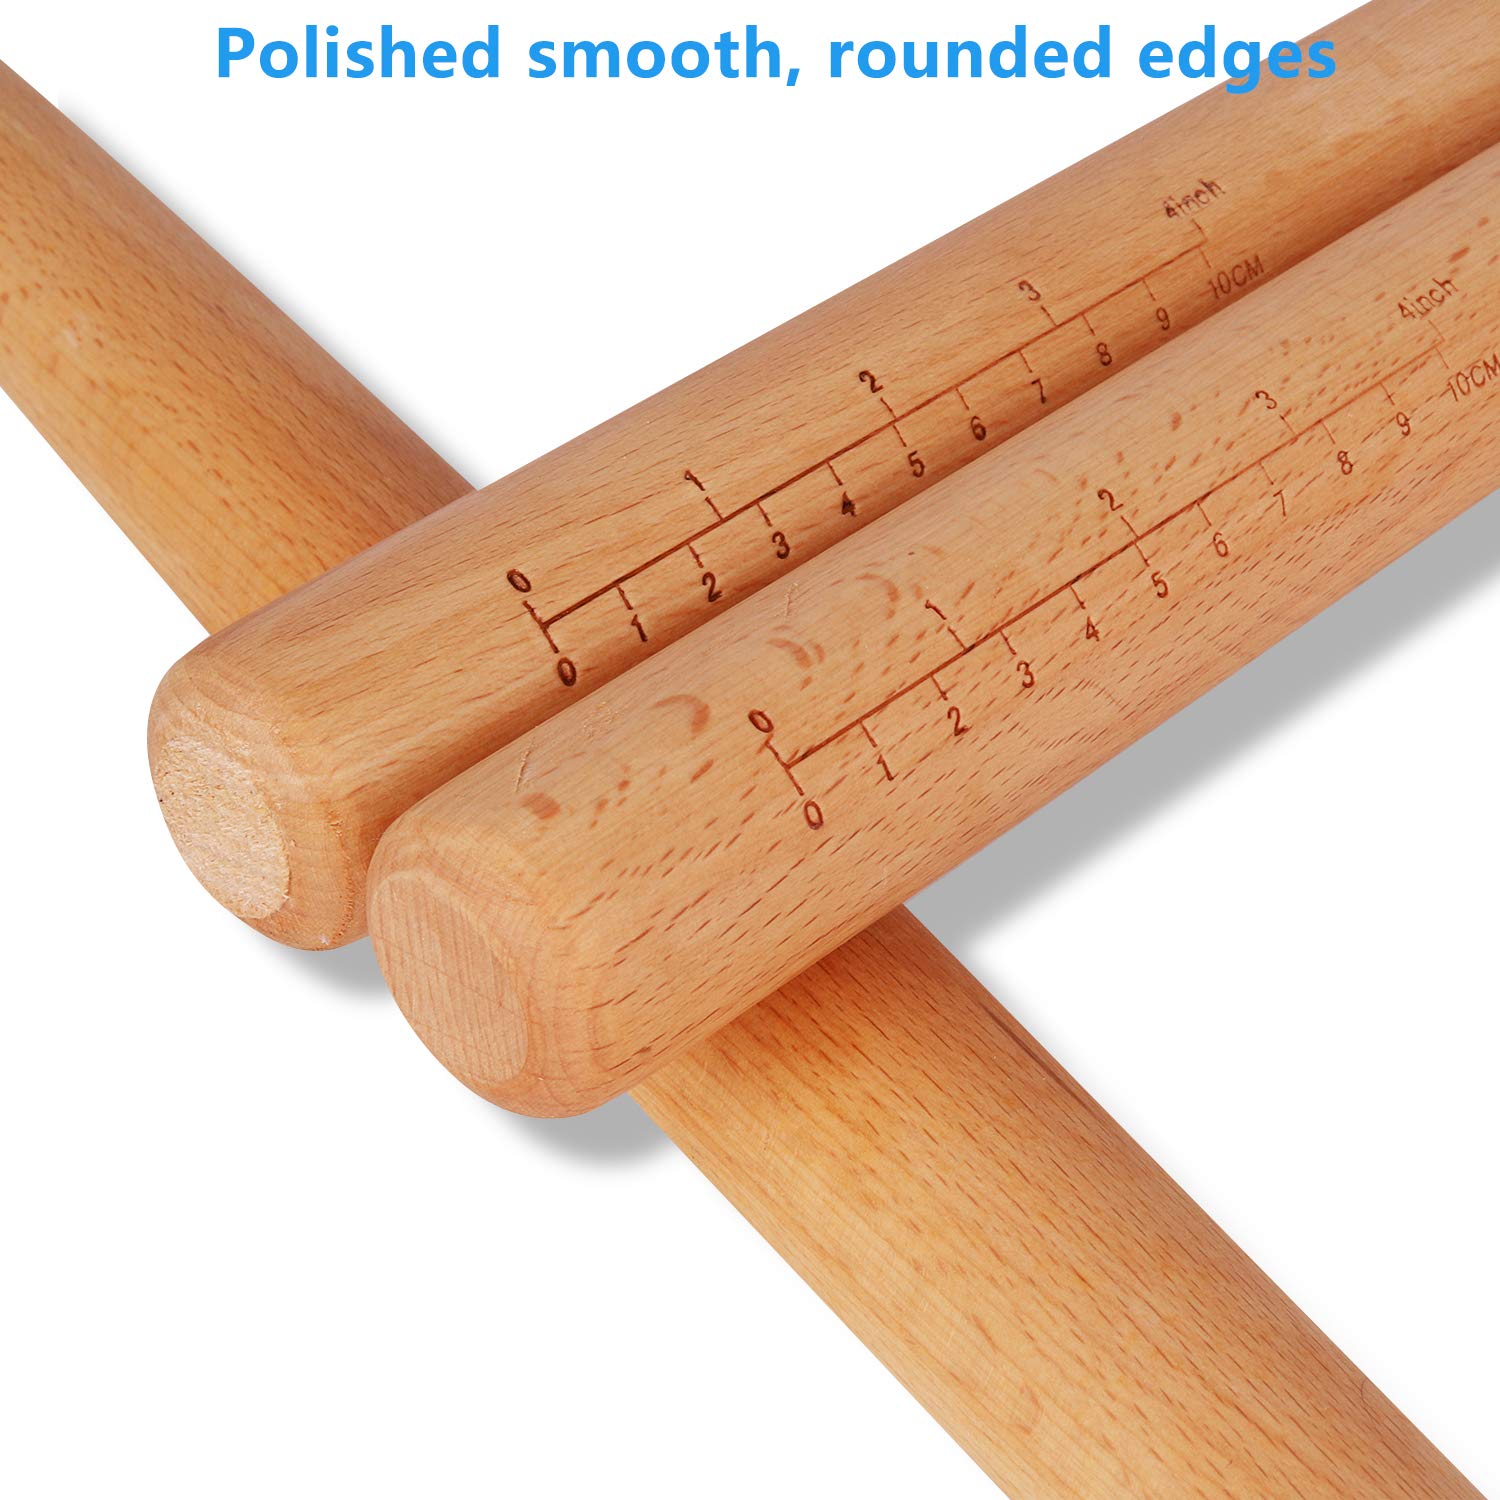 Rolling Pin - Dough Roller 17 3/5 Inch by 1-3/8 Inch, Professional Wood Rolling Pin for Baking Pizza, Clay, Pasta, Cookies, Dumpling